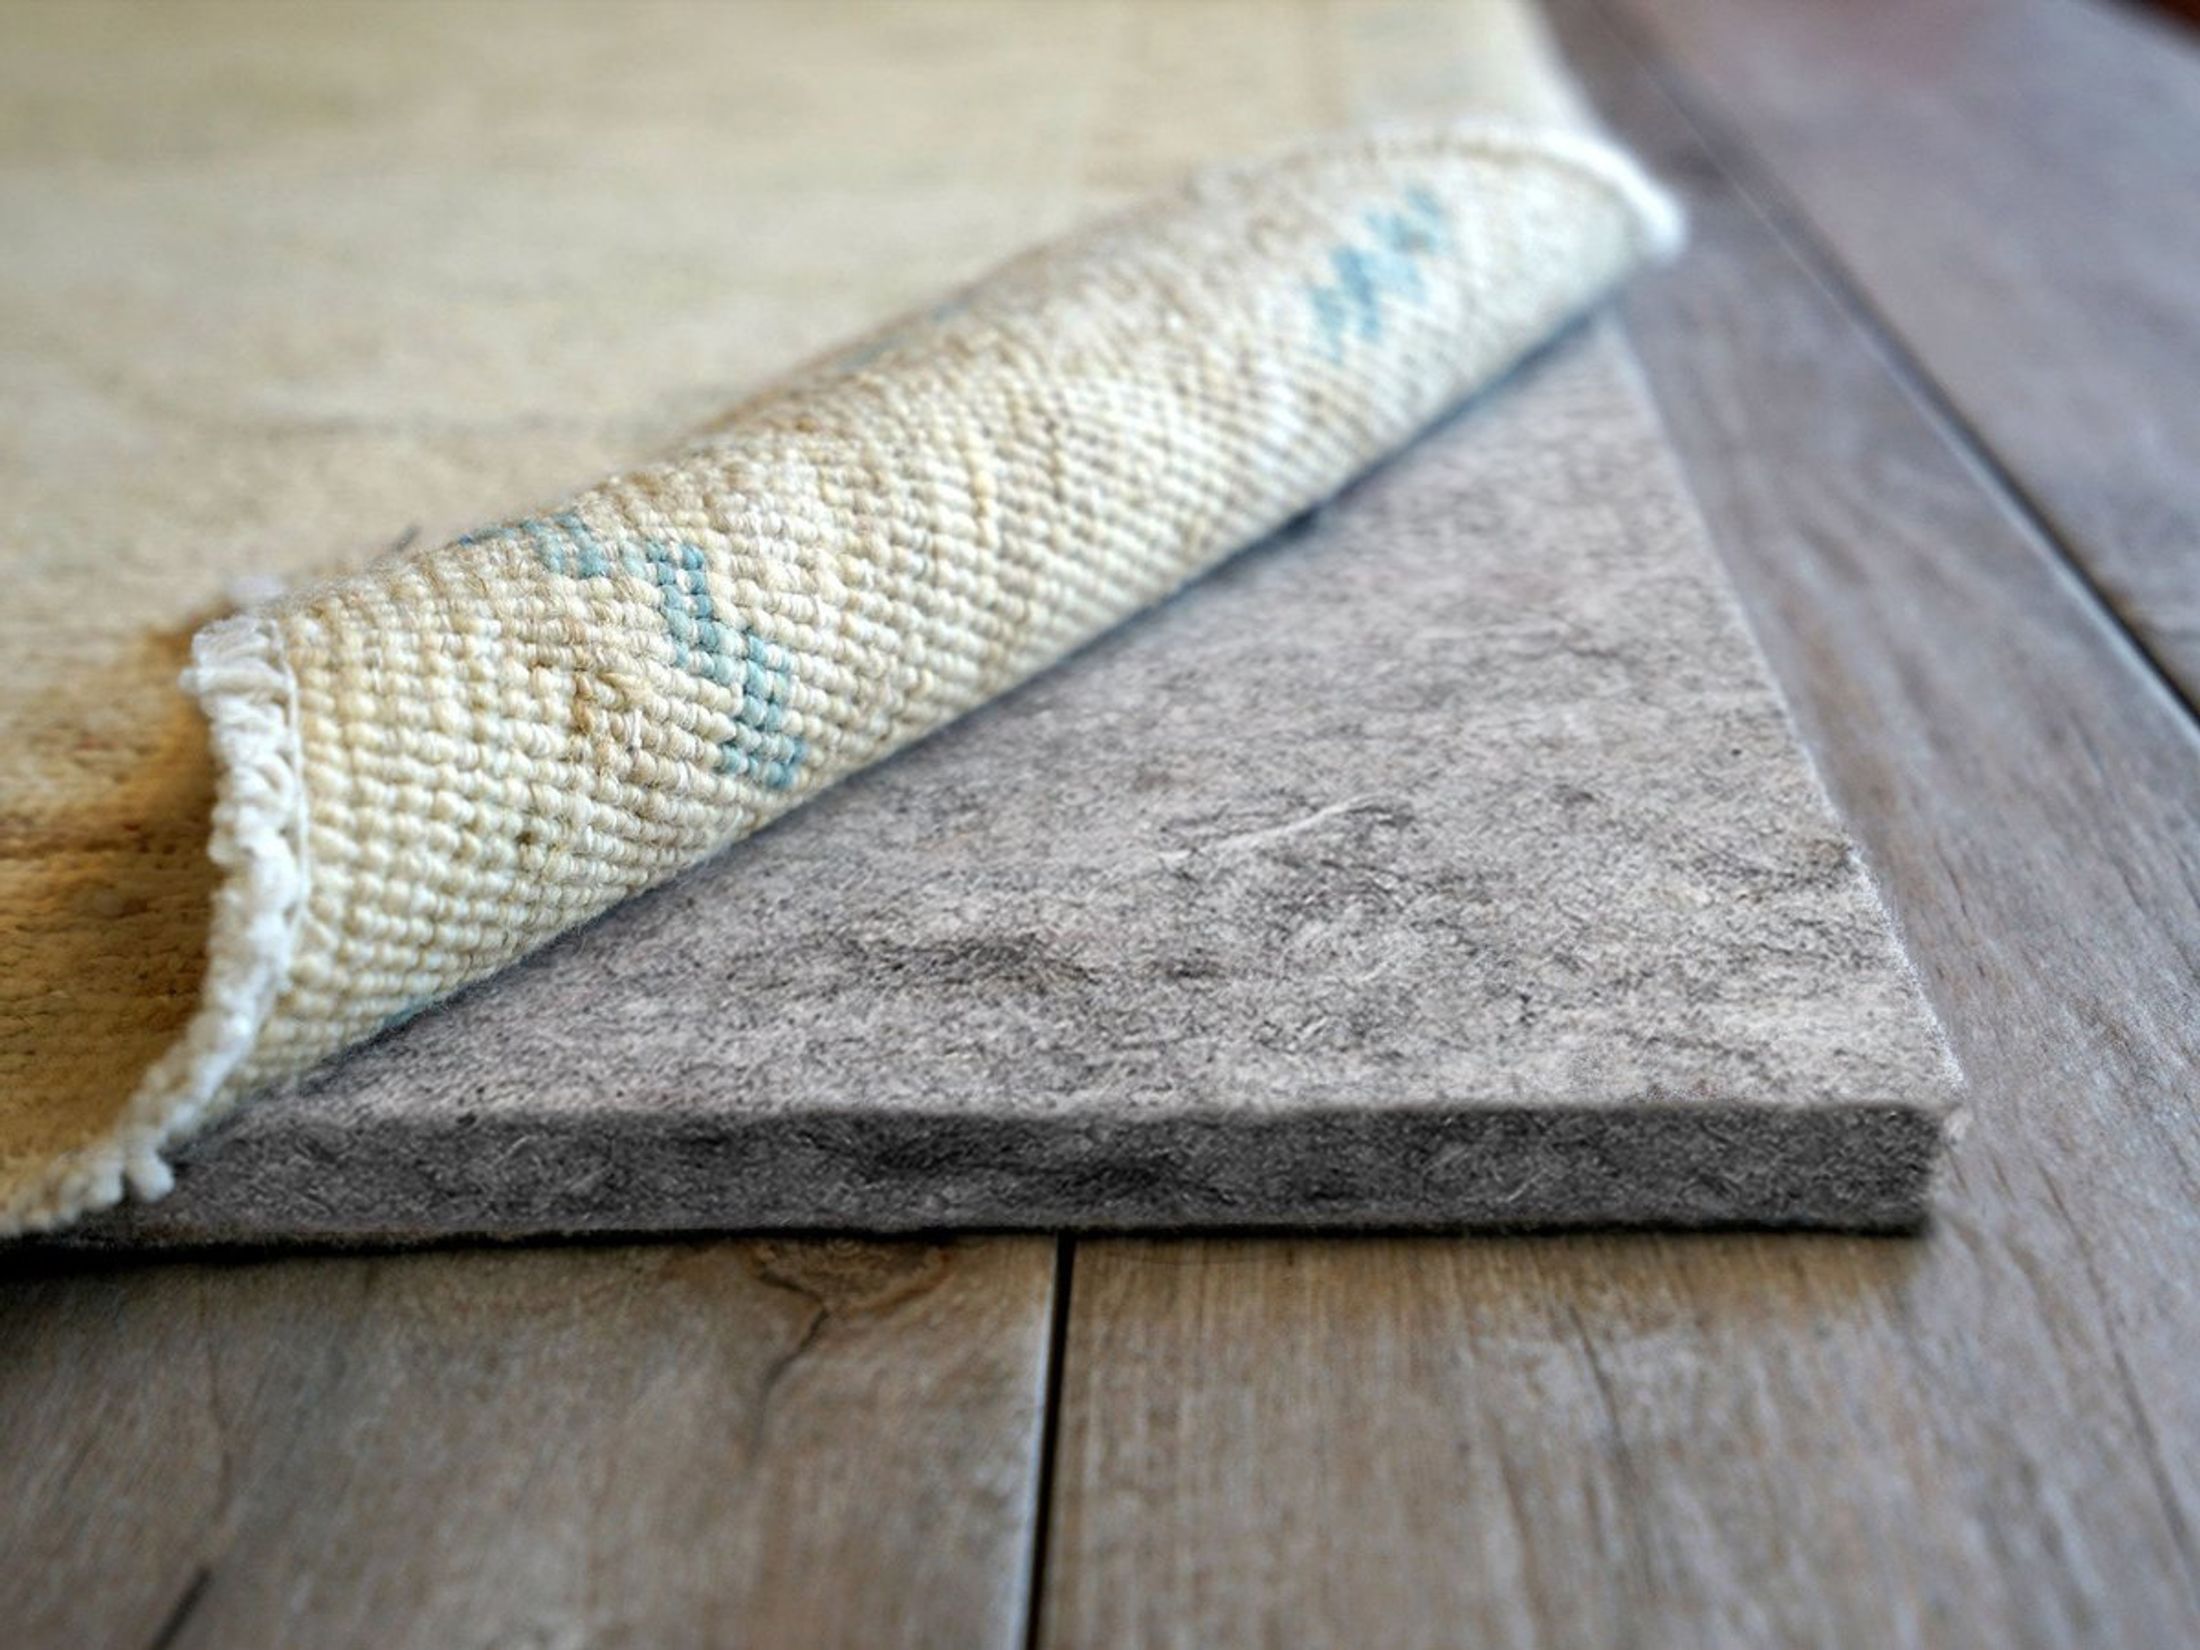 How to choose the right rug pad for your area rugs - RugPadUSA